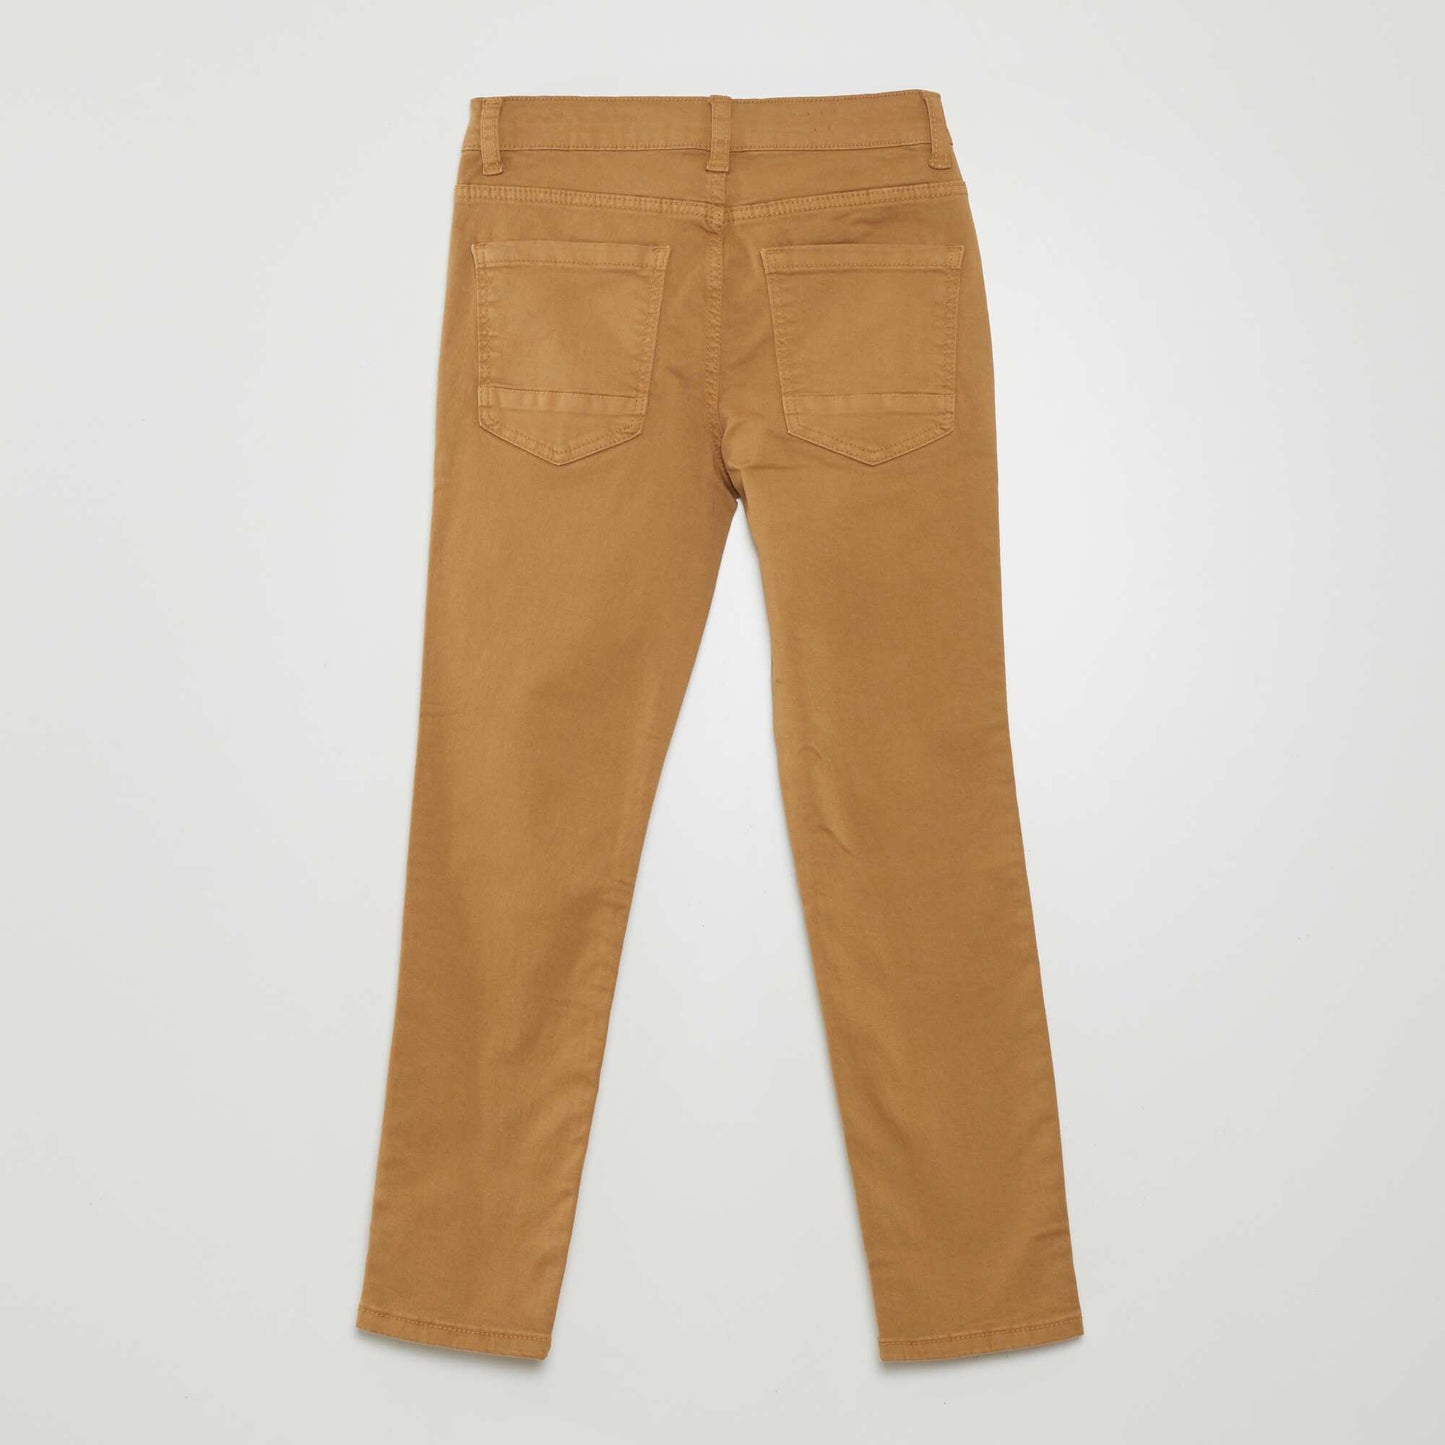 Skinny trousers with five pockets BROWN